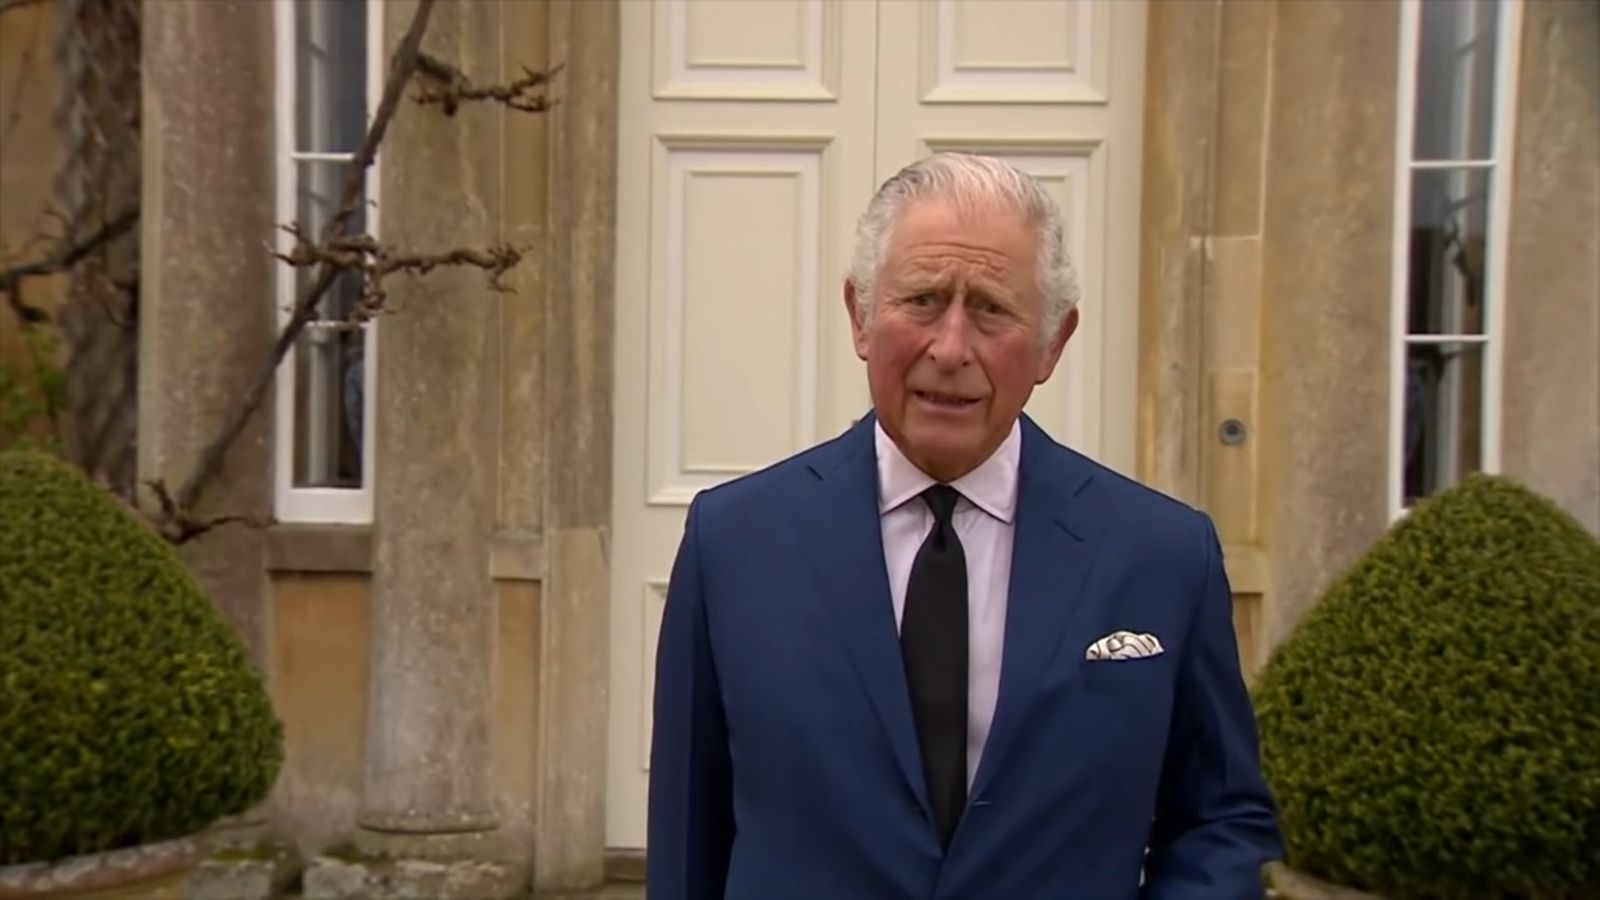 prince-charles-shock-camilla-parker-bowles-husband-allegedly-iced-prince-harry-after-duke-refused-to-share-details-of-his-memoir-with-his-father-royal-expert-claims